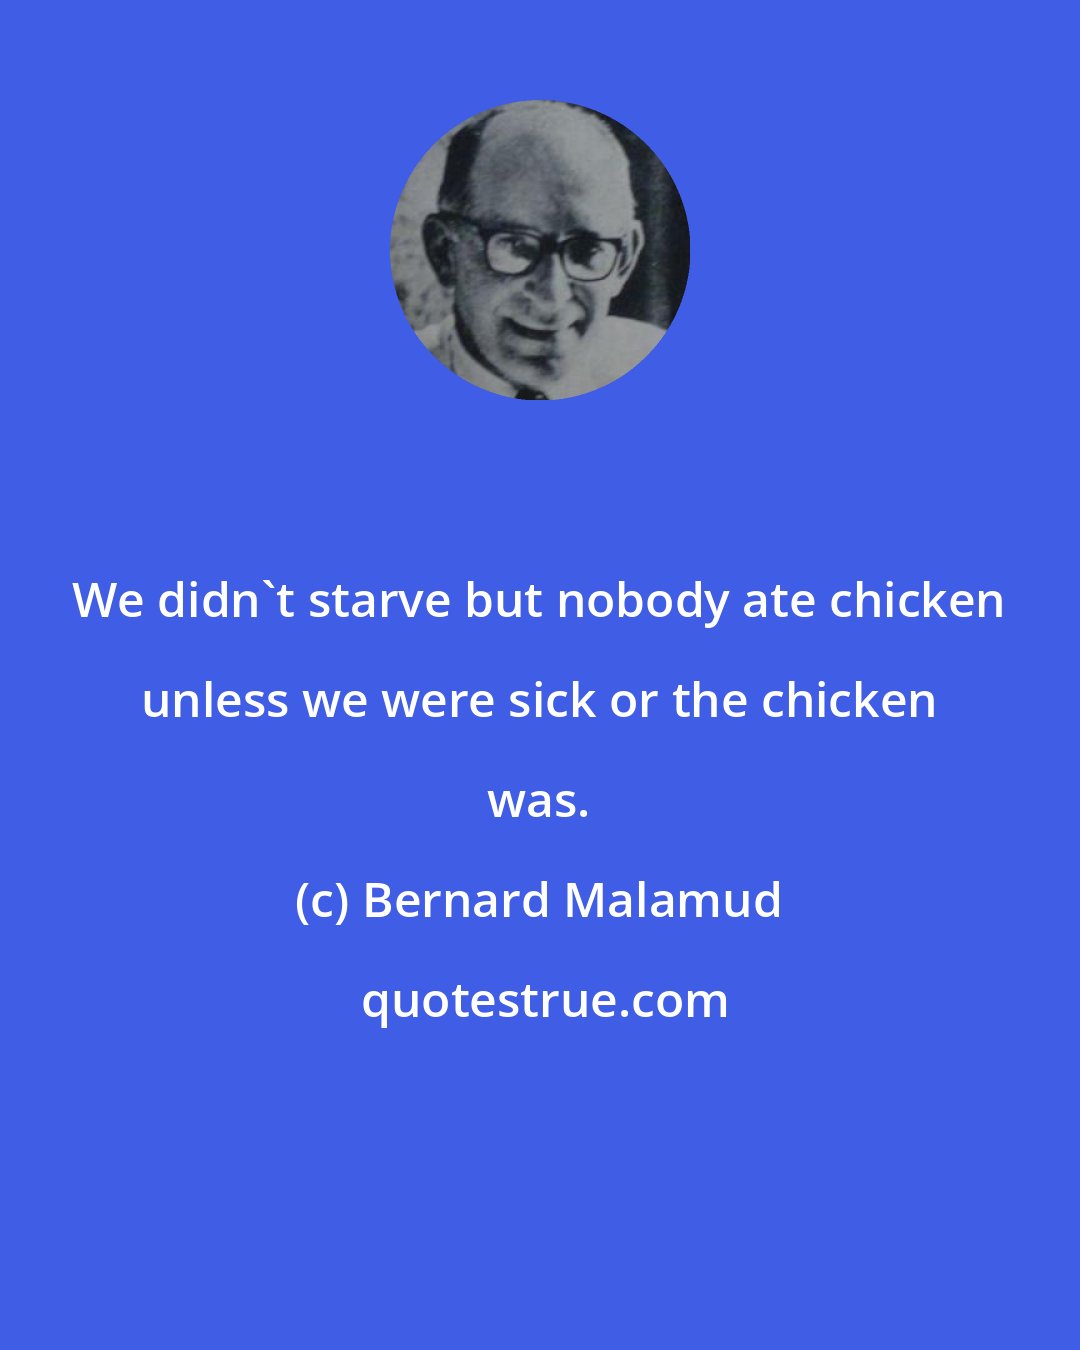 Bernard Malamud: We didn't starve but nobody ate chicken unless we were sick or the chicken was.